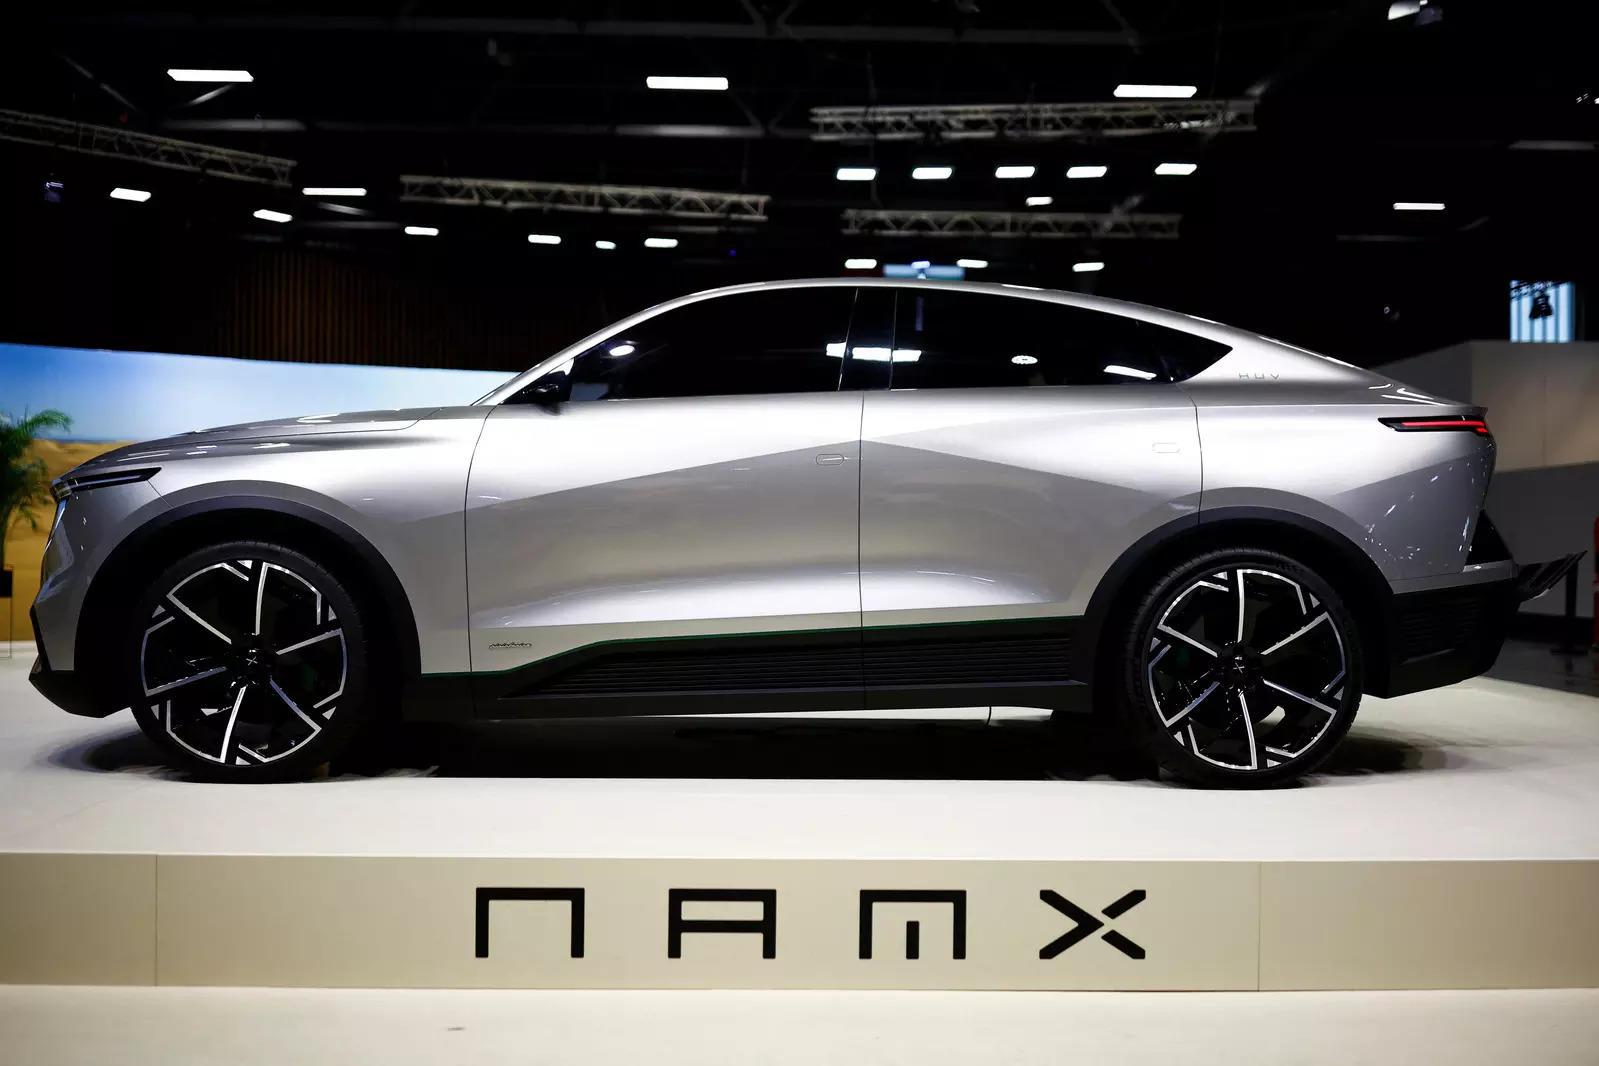 40 images of swanky cars at Paris Motor Show 2022